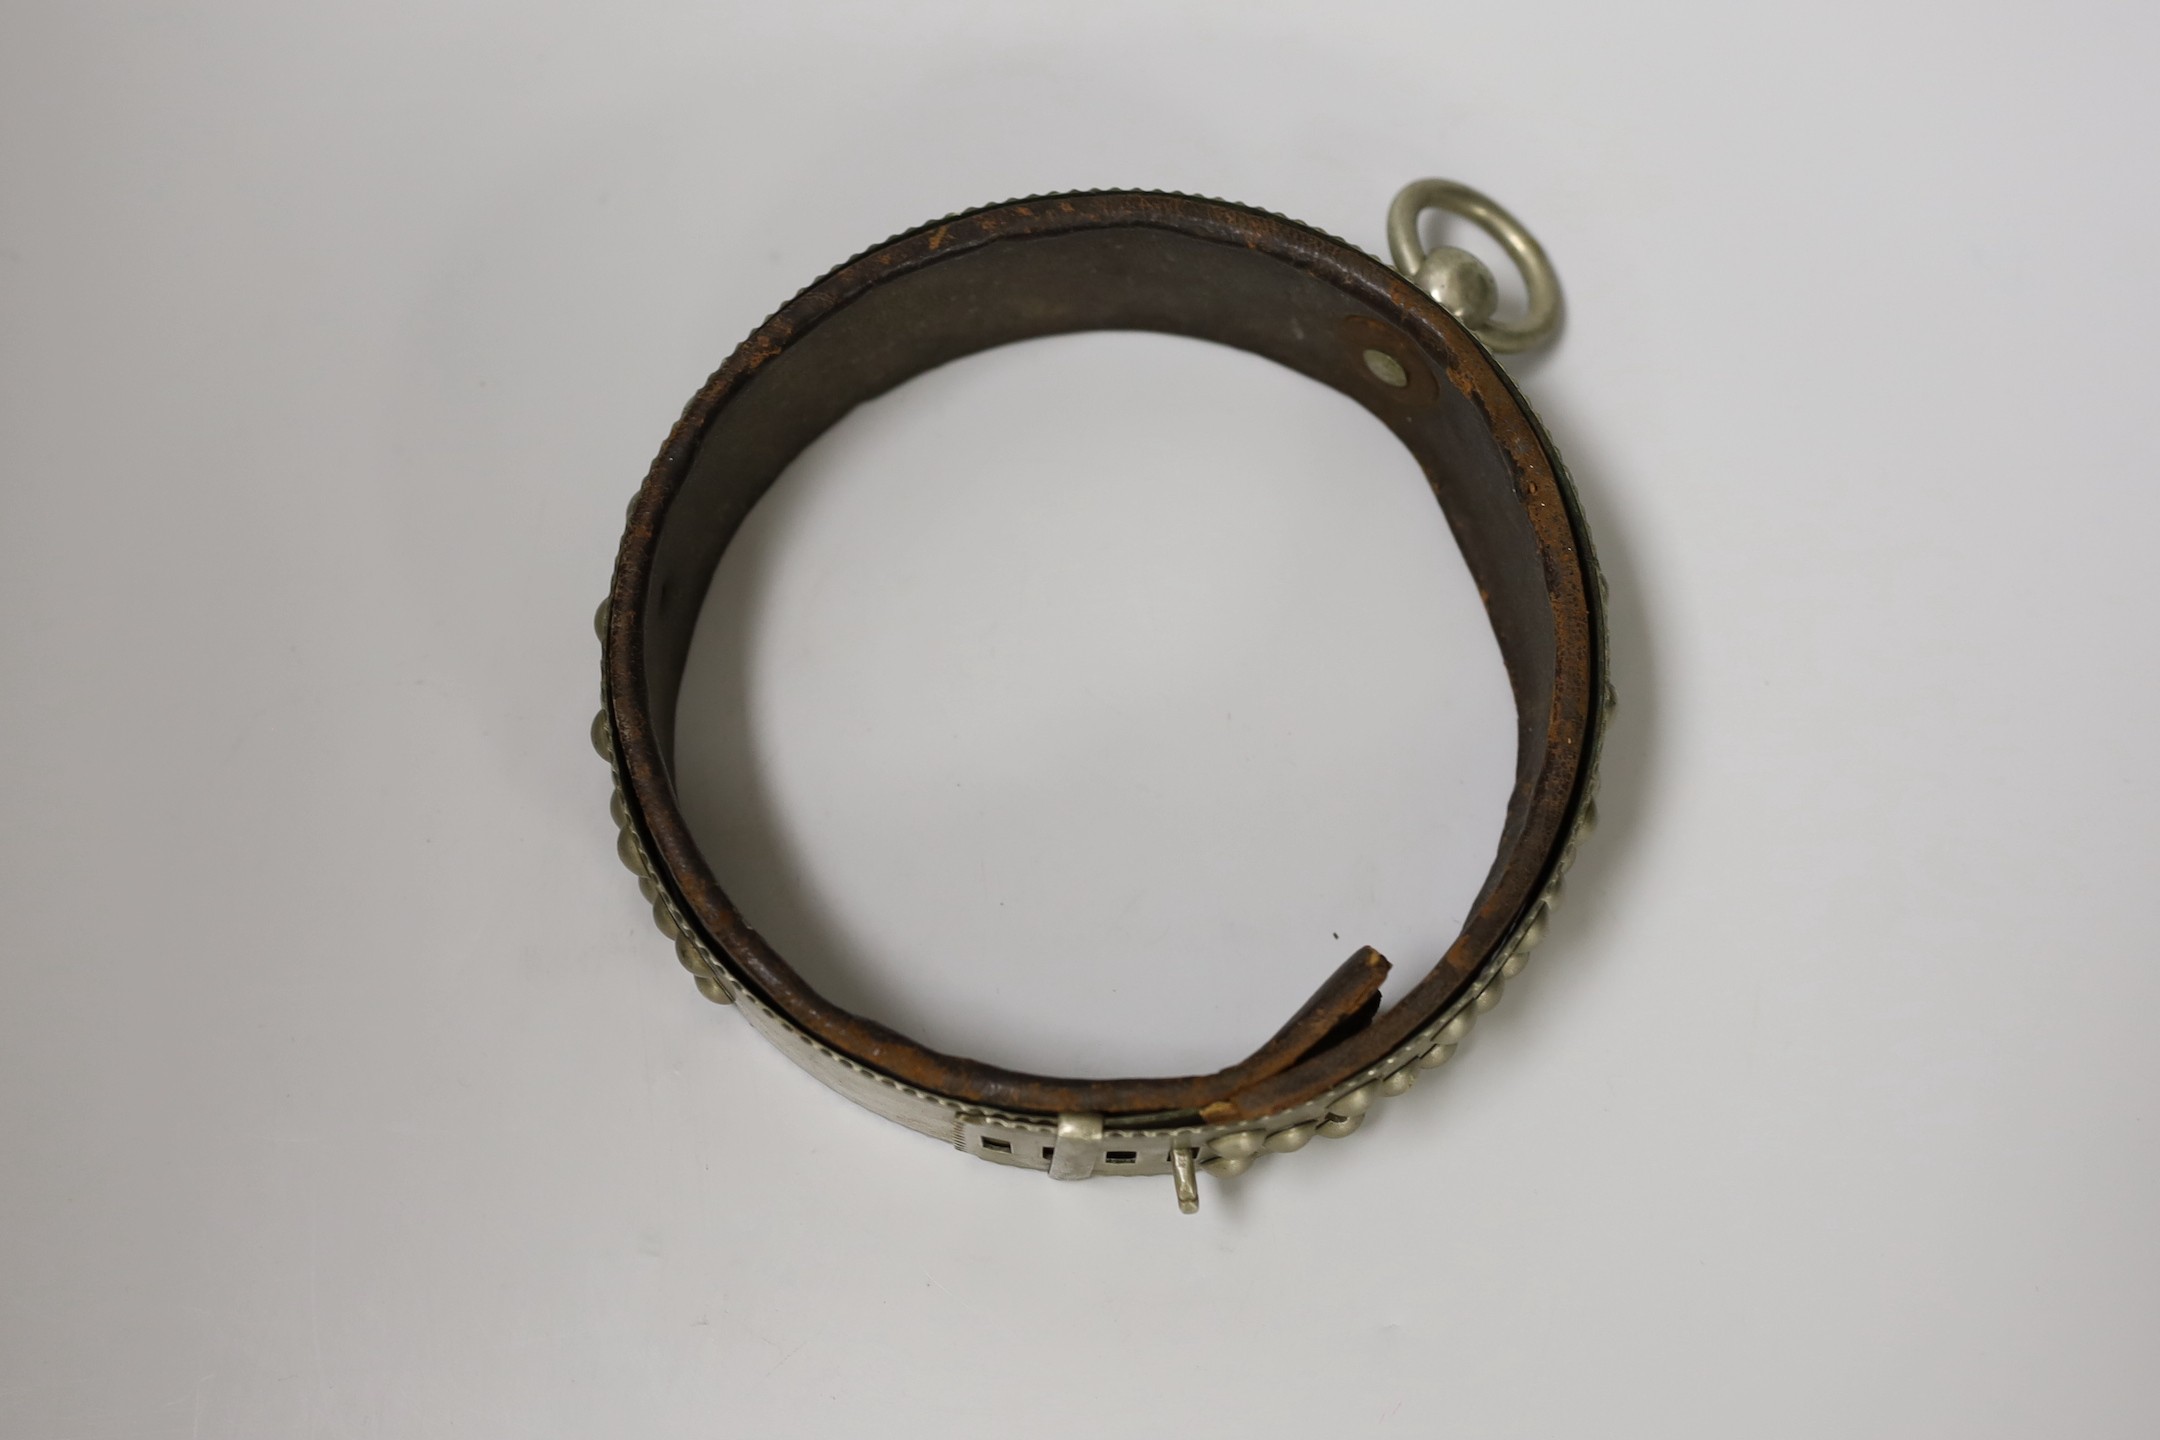 A Victorian nickel studded dog collar engraved 'EMON, MRS KING 9 CASTELLAIN RD. MAIDA VALE', 16.5 cm - Image 3 of 3